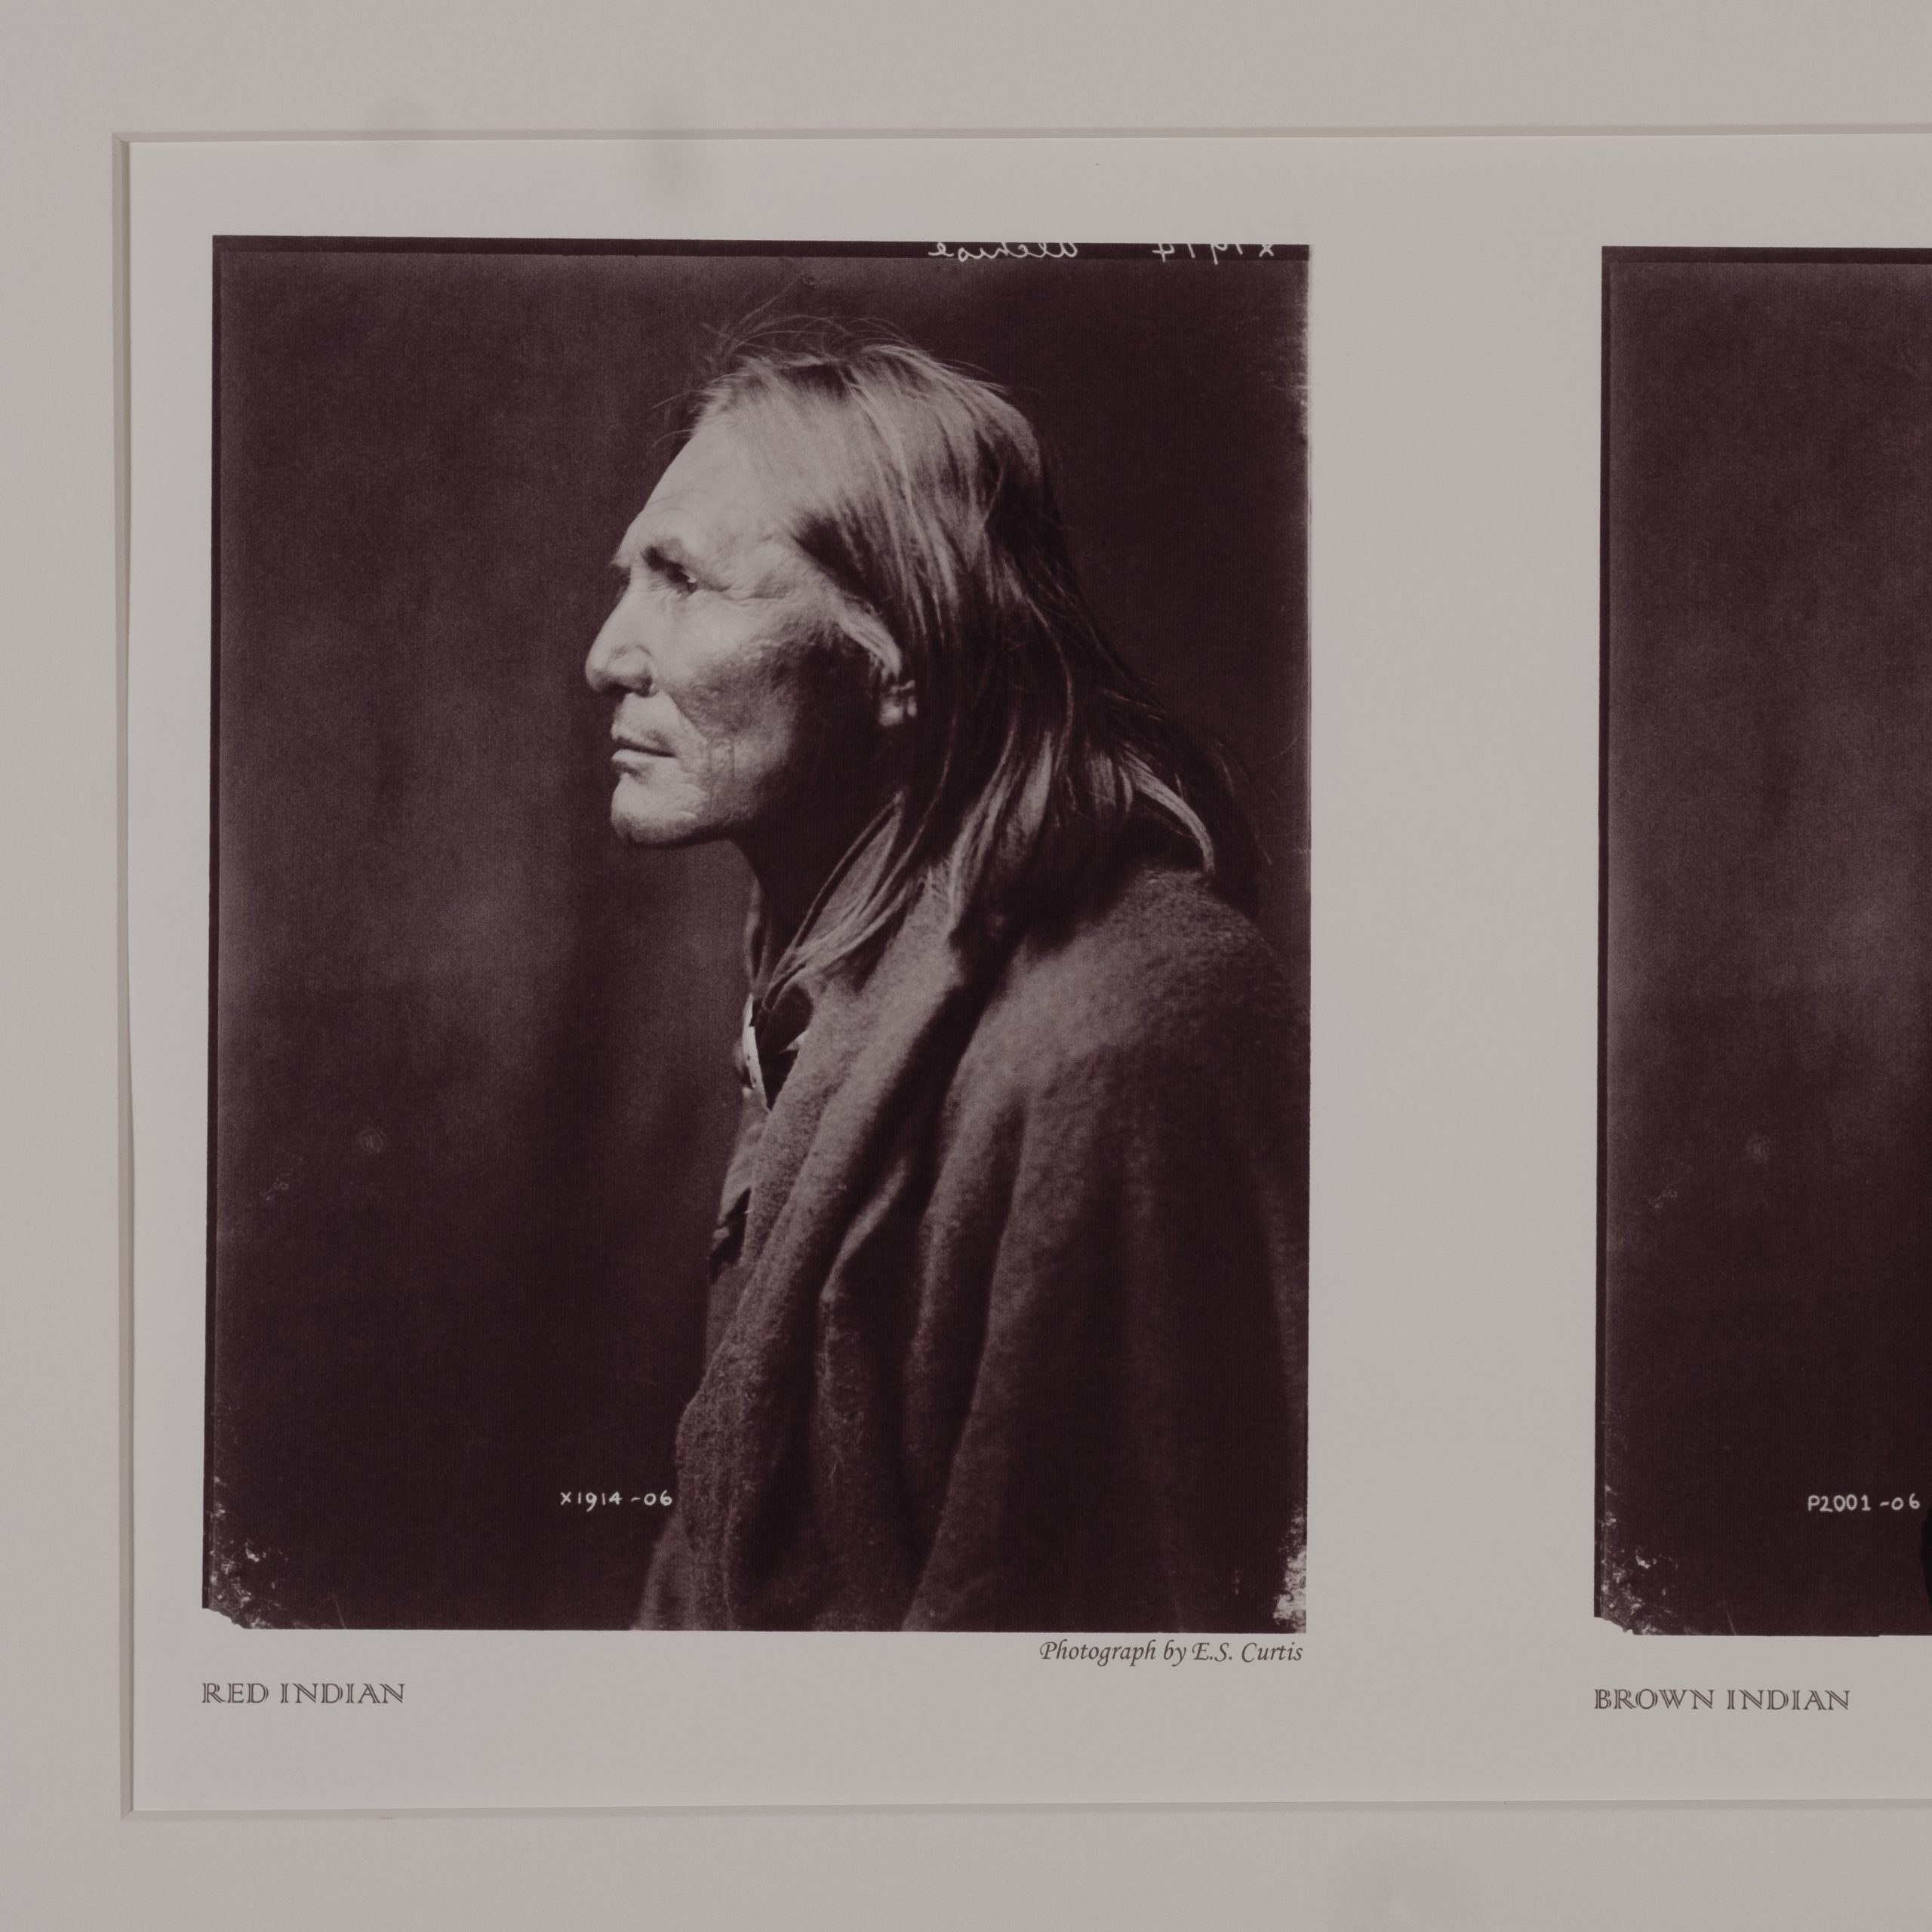 Two images, a man and a woman in the same position, facing left, light exposing the face. Under the man a cations reads, Red Indian, and under the woman a caption reads, Brown Indian.